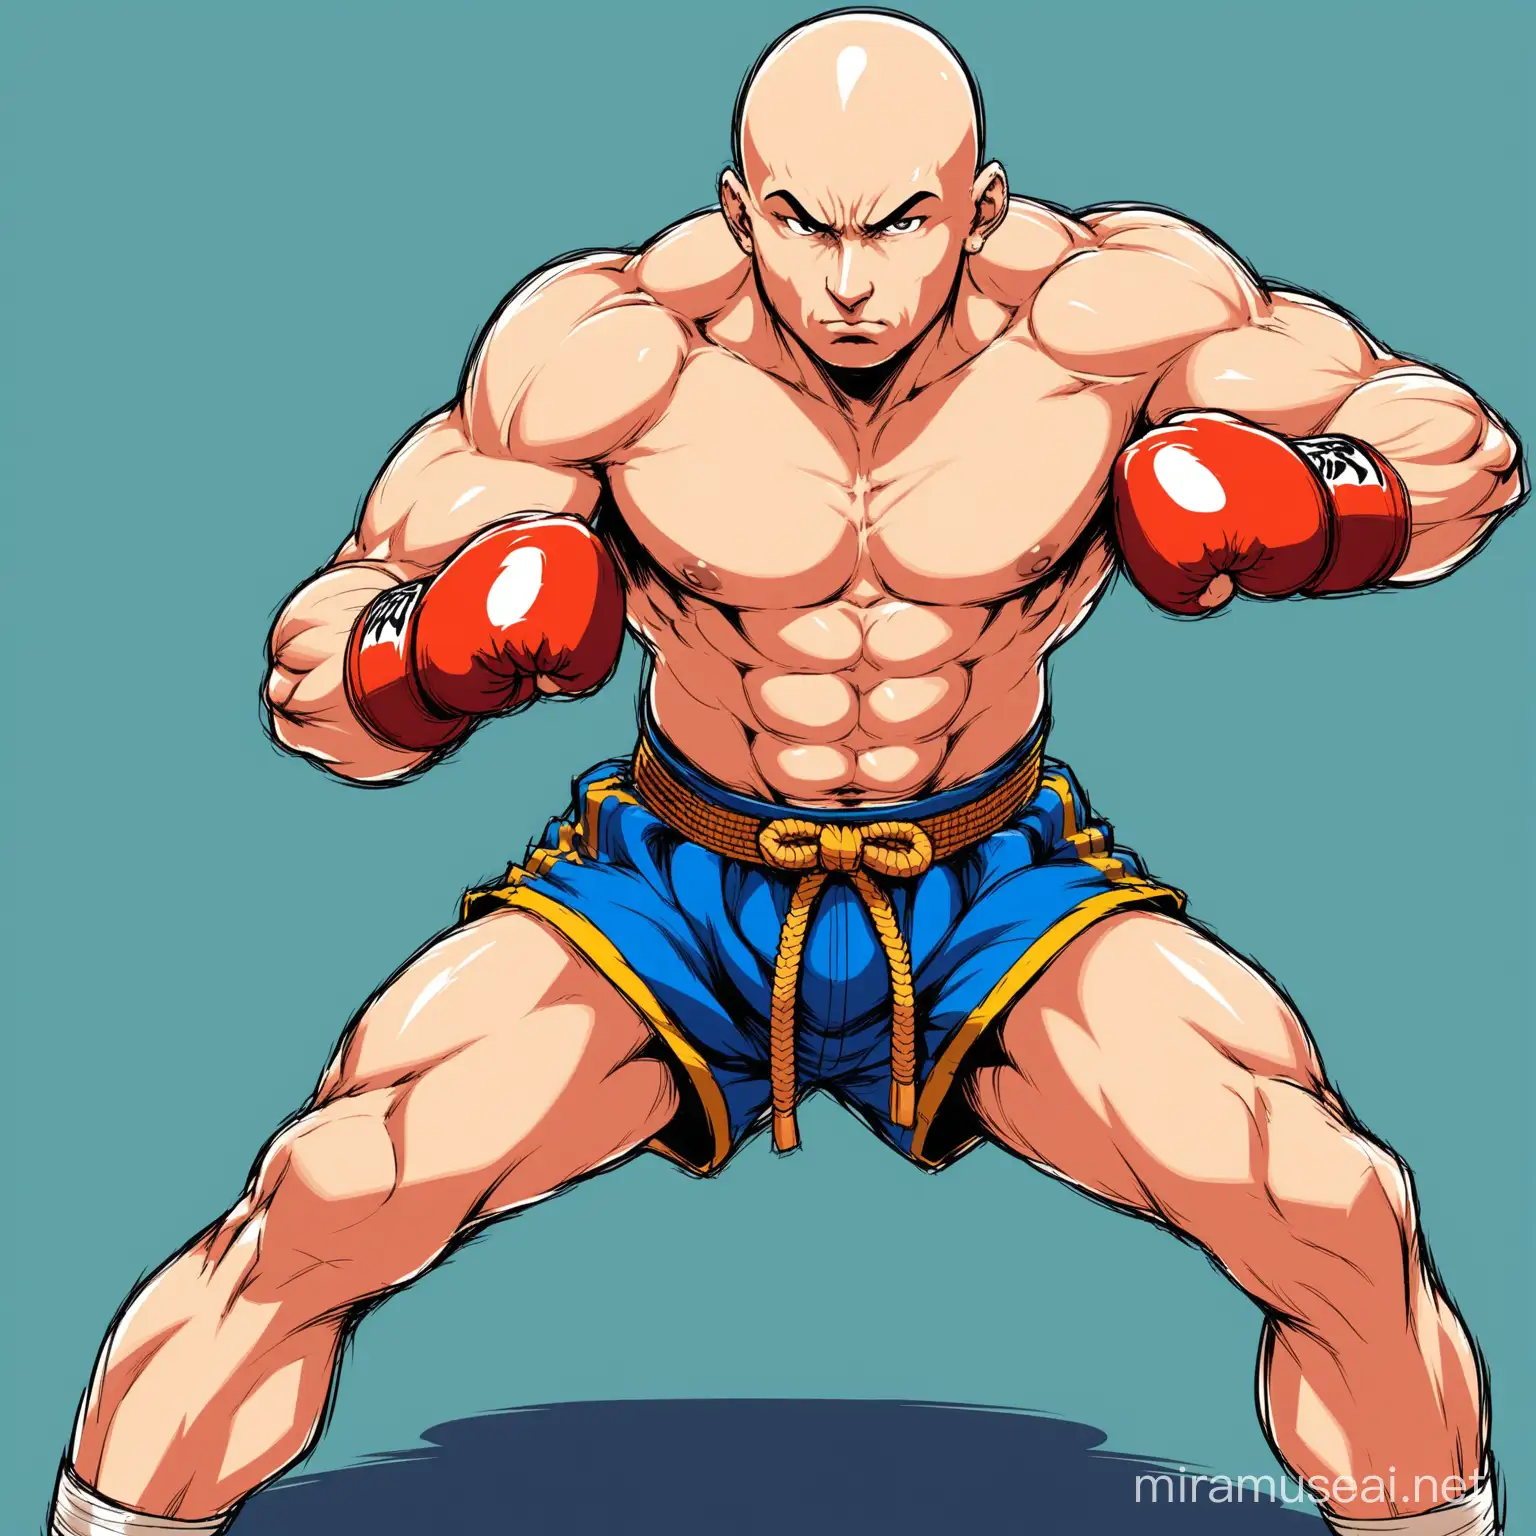 bald man character, strong, street fighter, muay thai position, shirtless, vector